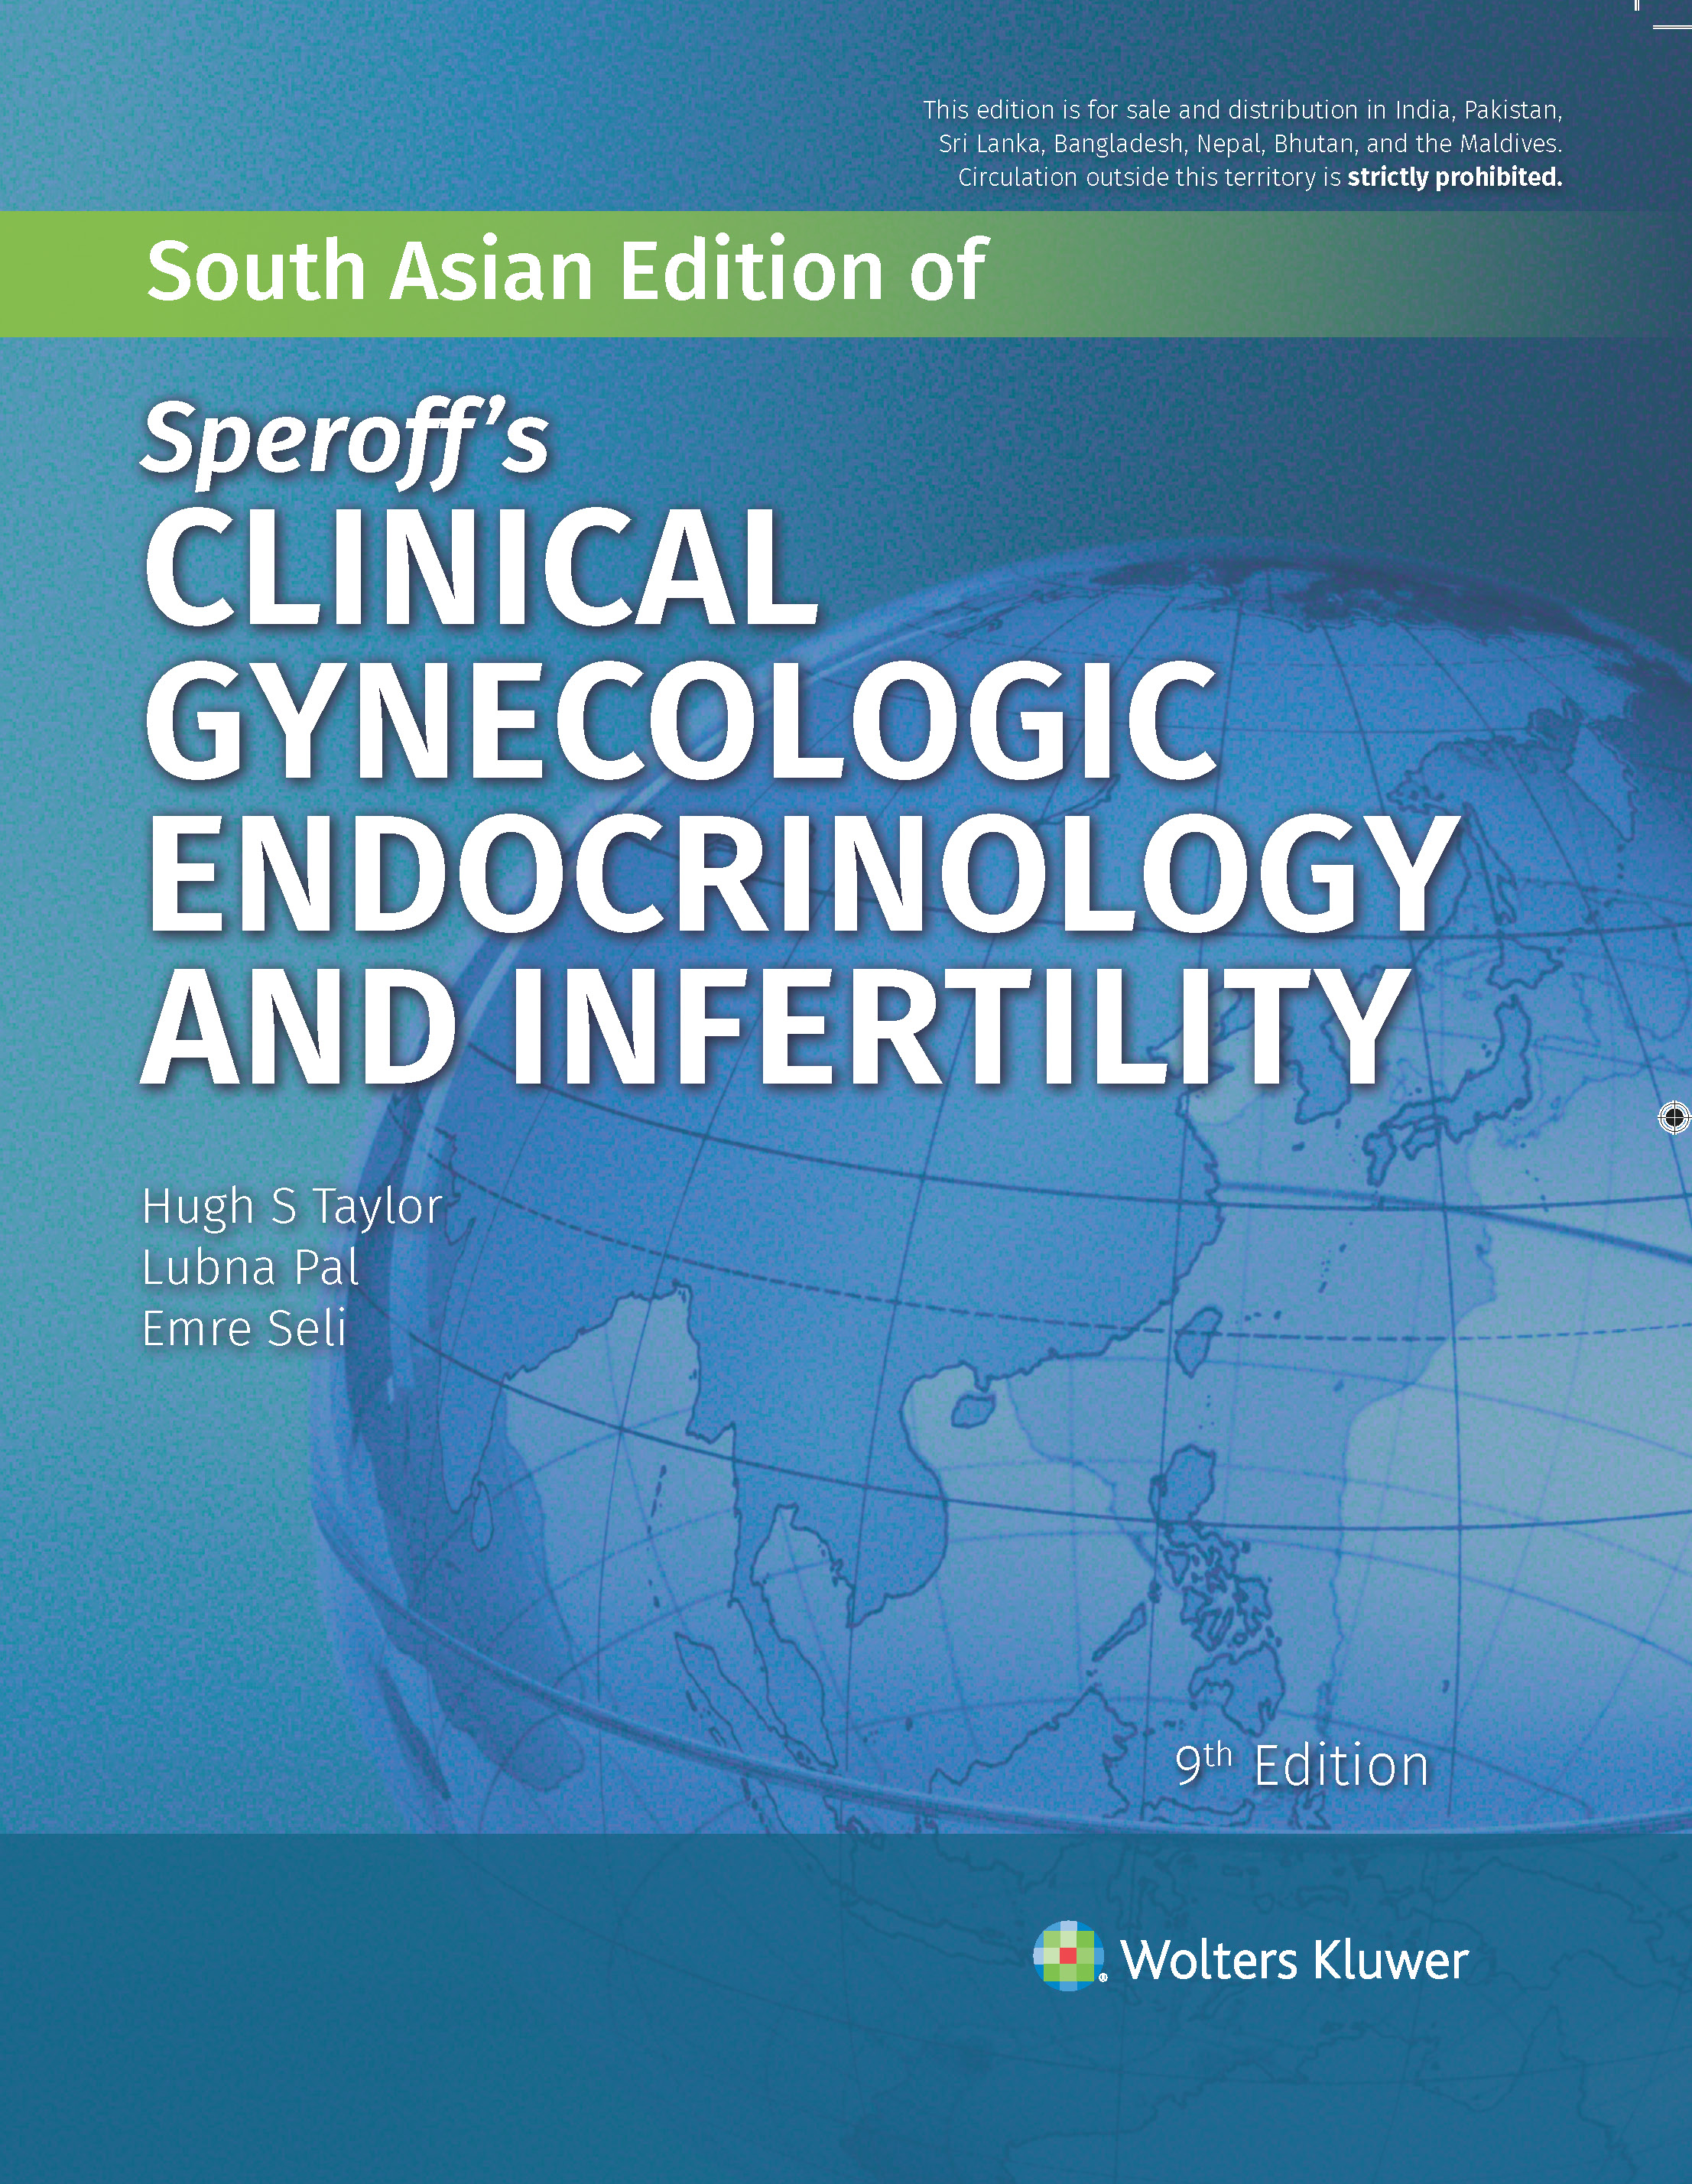 Speroff Clinical Gynecologic Endocrinology And Infertility, 9E (With Scratch Codes) Old Edition